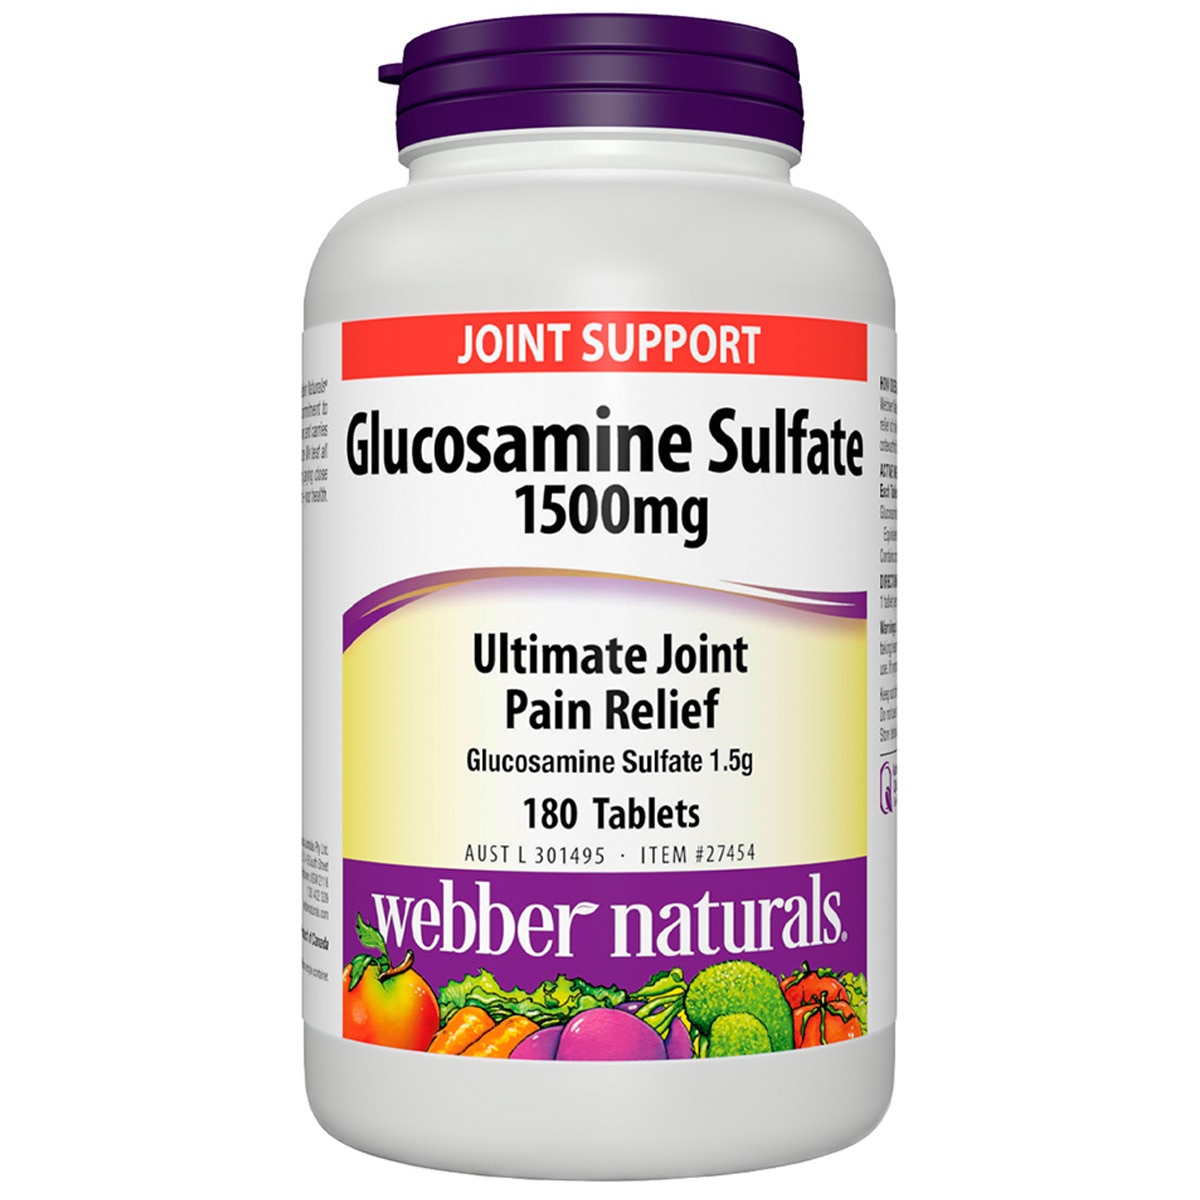 Webber Naturals Glucosamine Sulfate 1500mg 180 tabs